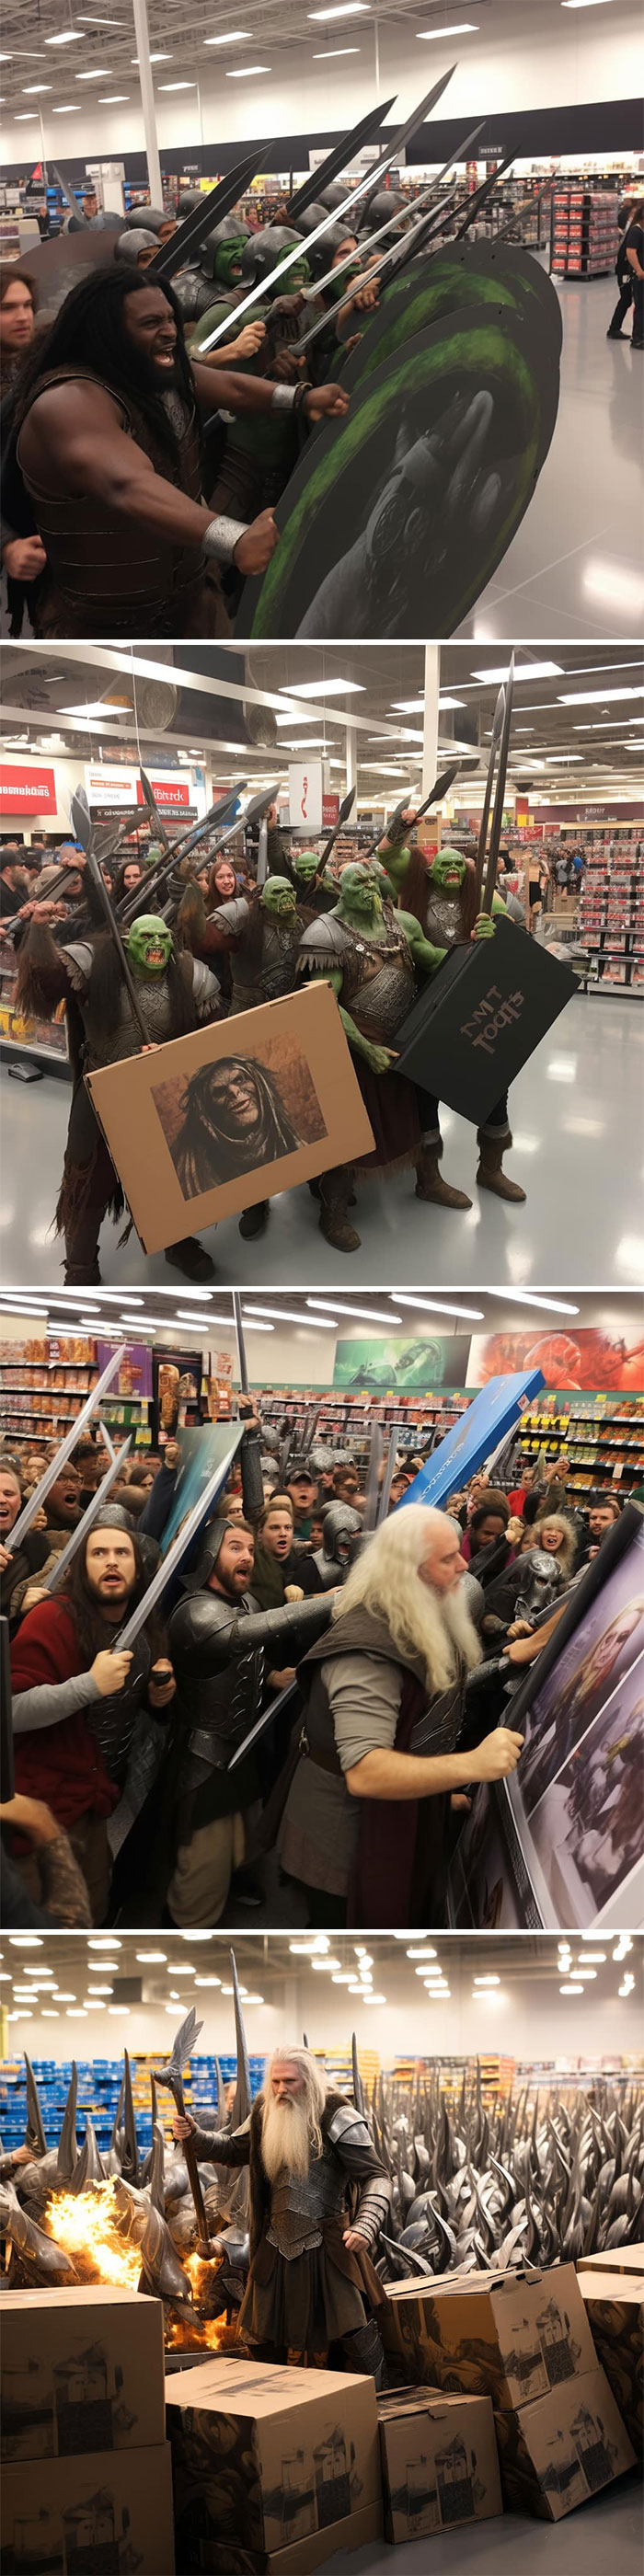 Sauron Is Victorious On The Battle Of Black Friday